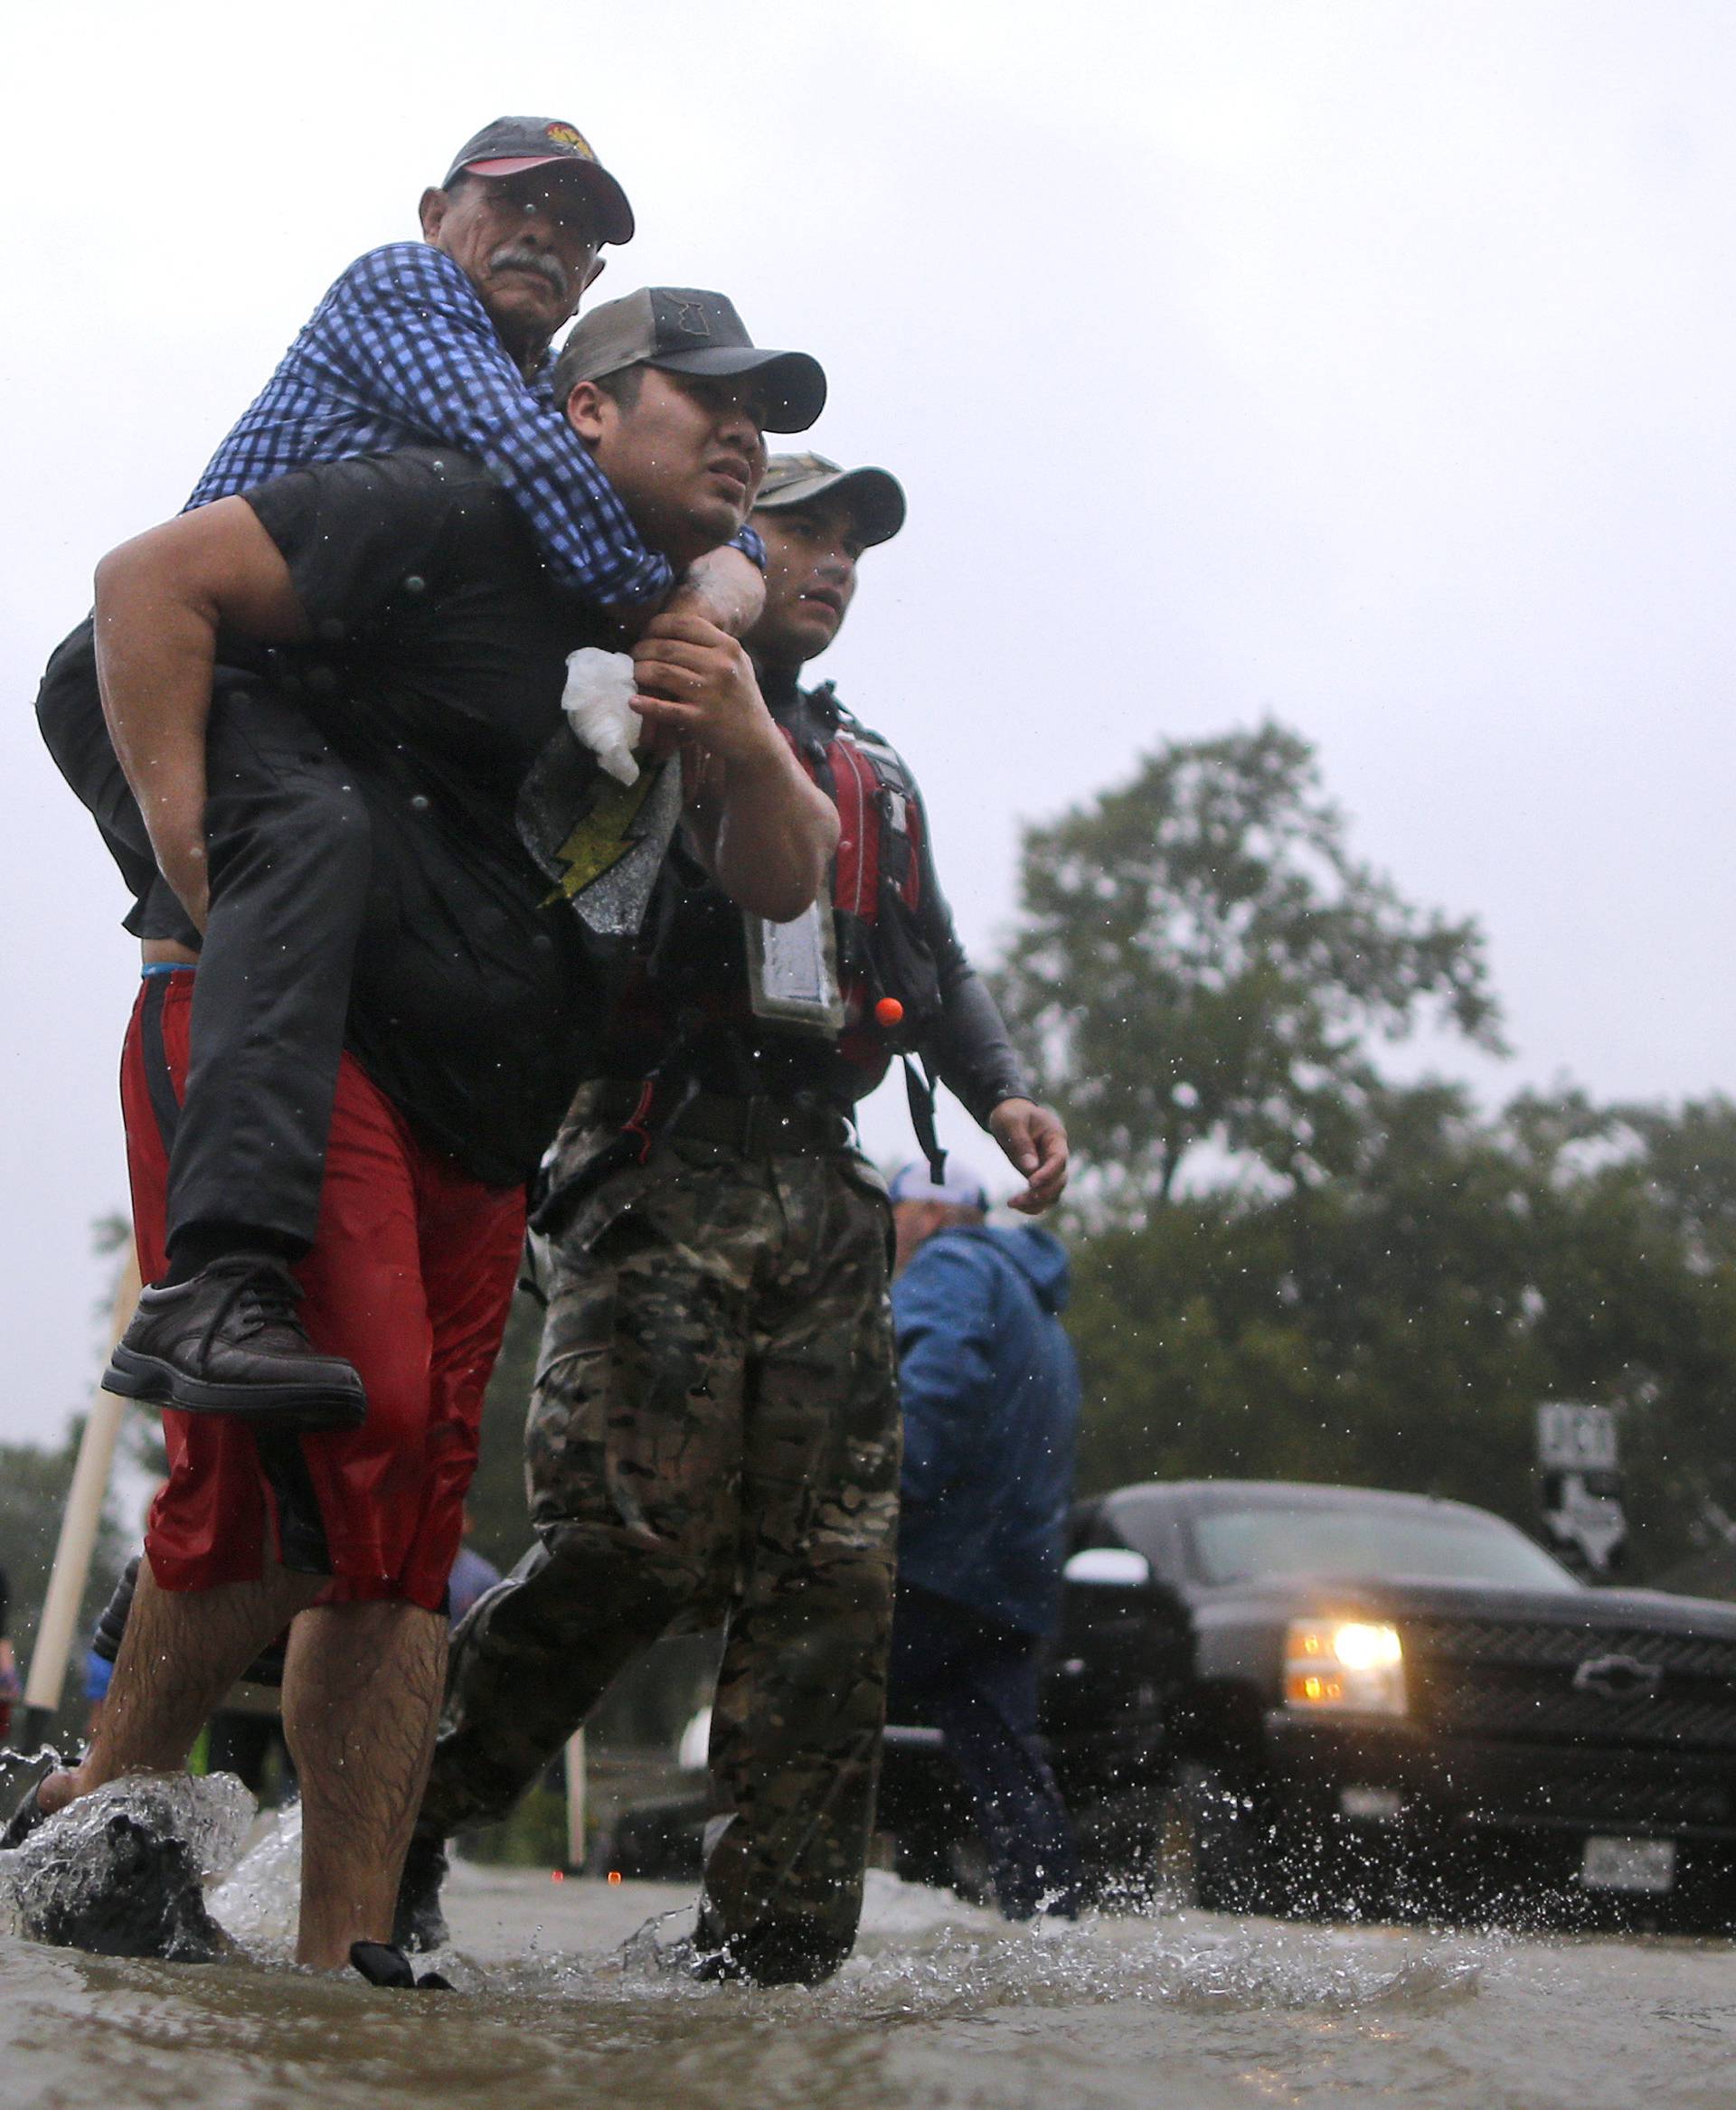 An elderly man is carried after being rescued from the flood waters of tropical storm Harvey in east Houston